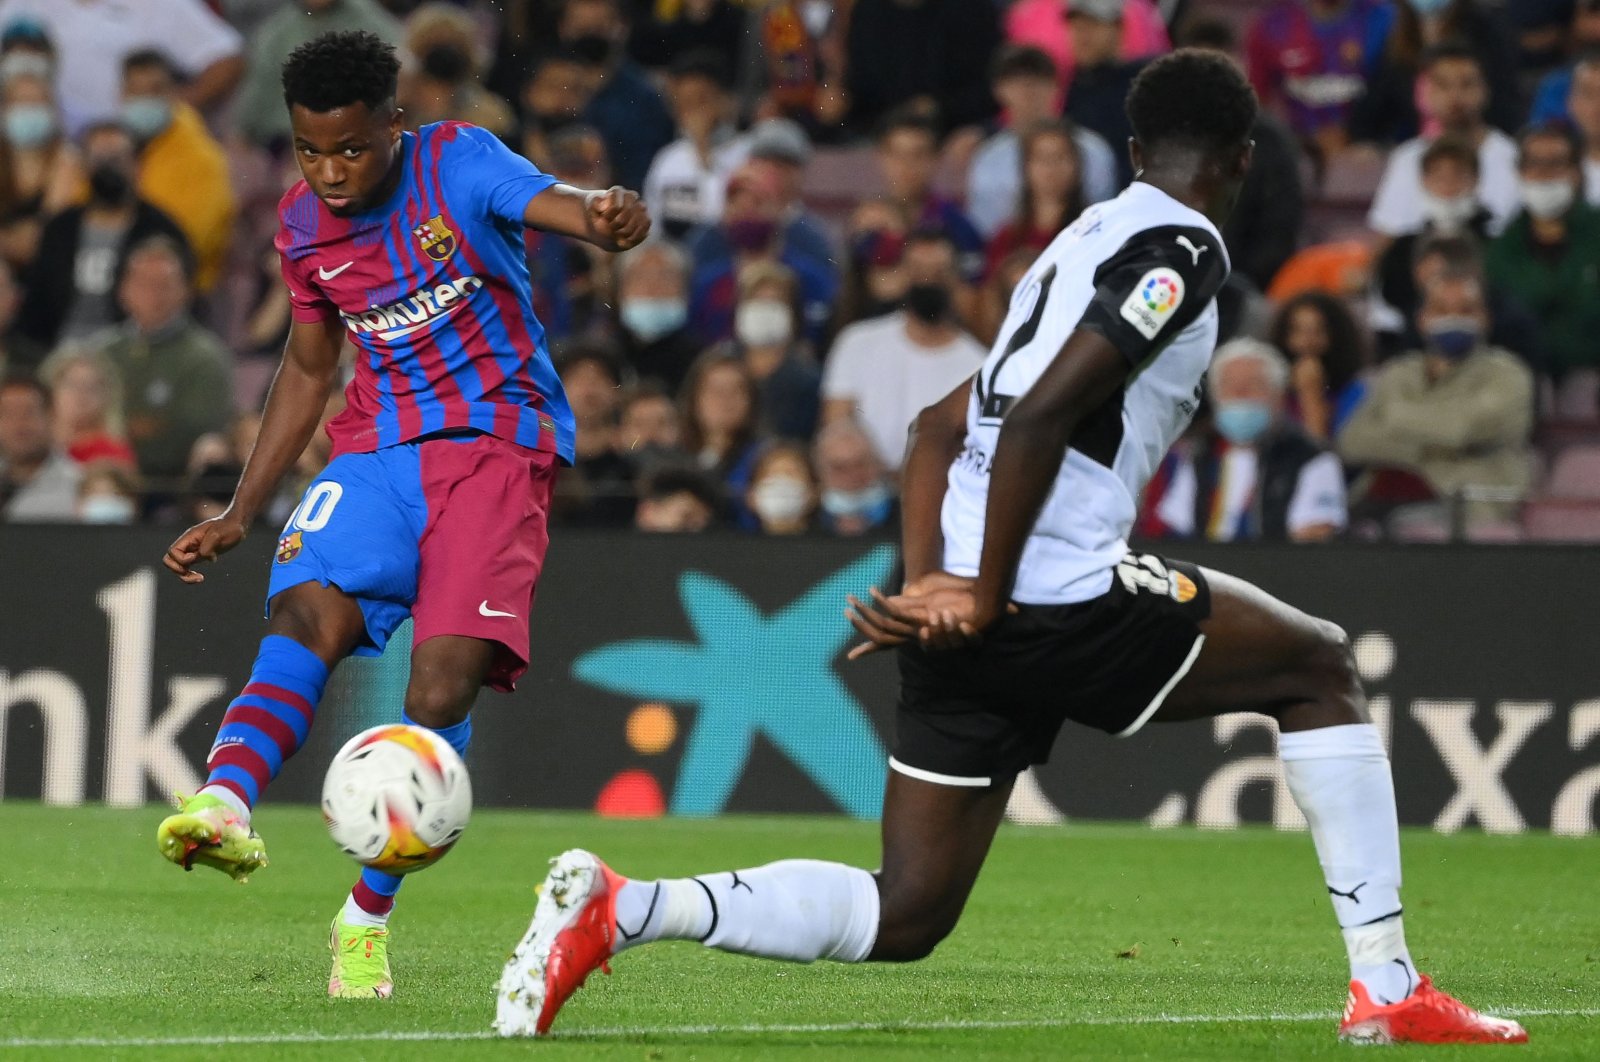 Barcelona's Spanish midfielder Ansu Fati (L) shoots to score his team's first goal in a La Liga match against Valencia at the Camp Nou, Barcelona, Spain, Oct. 17, 2021. (AFP Photo)